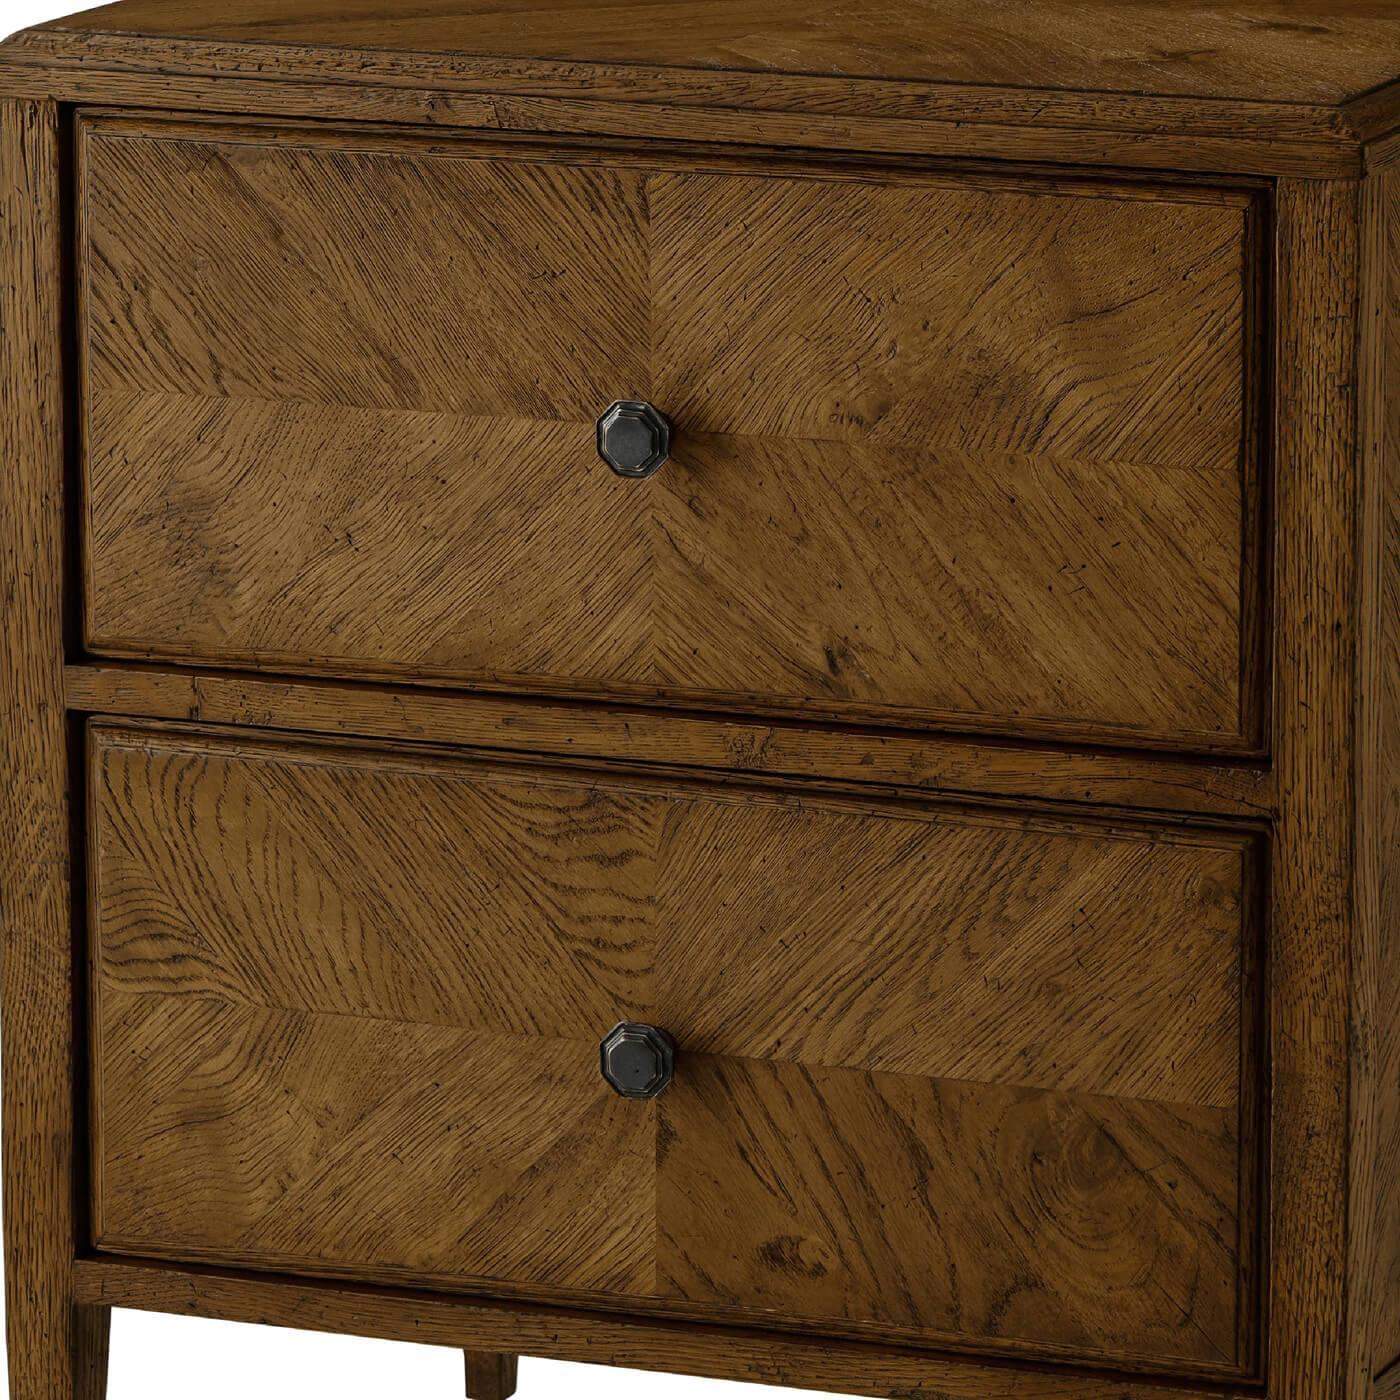 With a herringbone parquetry design. This beautiful nightstand has two frieze-inspired drawers with Verde Bronze handles. It is supported by two-tier stretcher shelves. 
Shown in Dusk Finish
Dimensions: 24